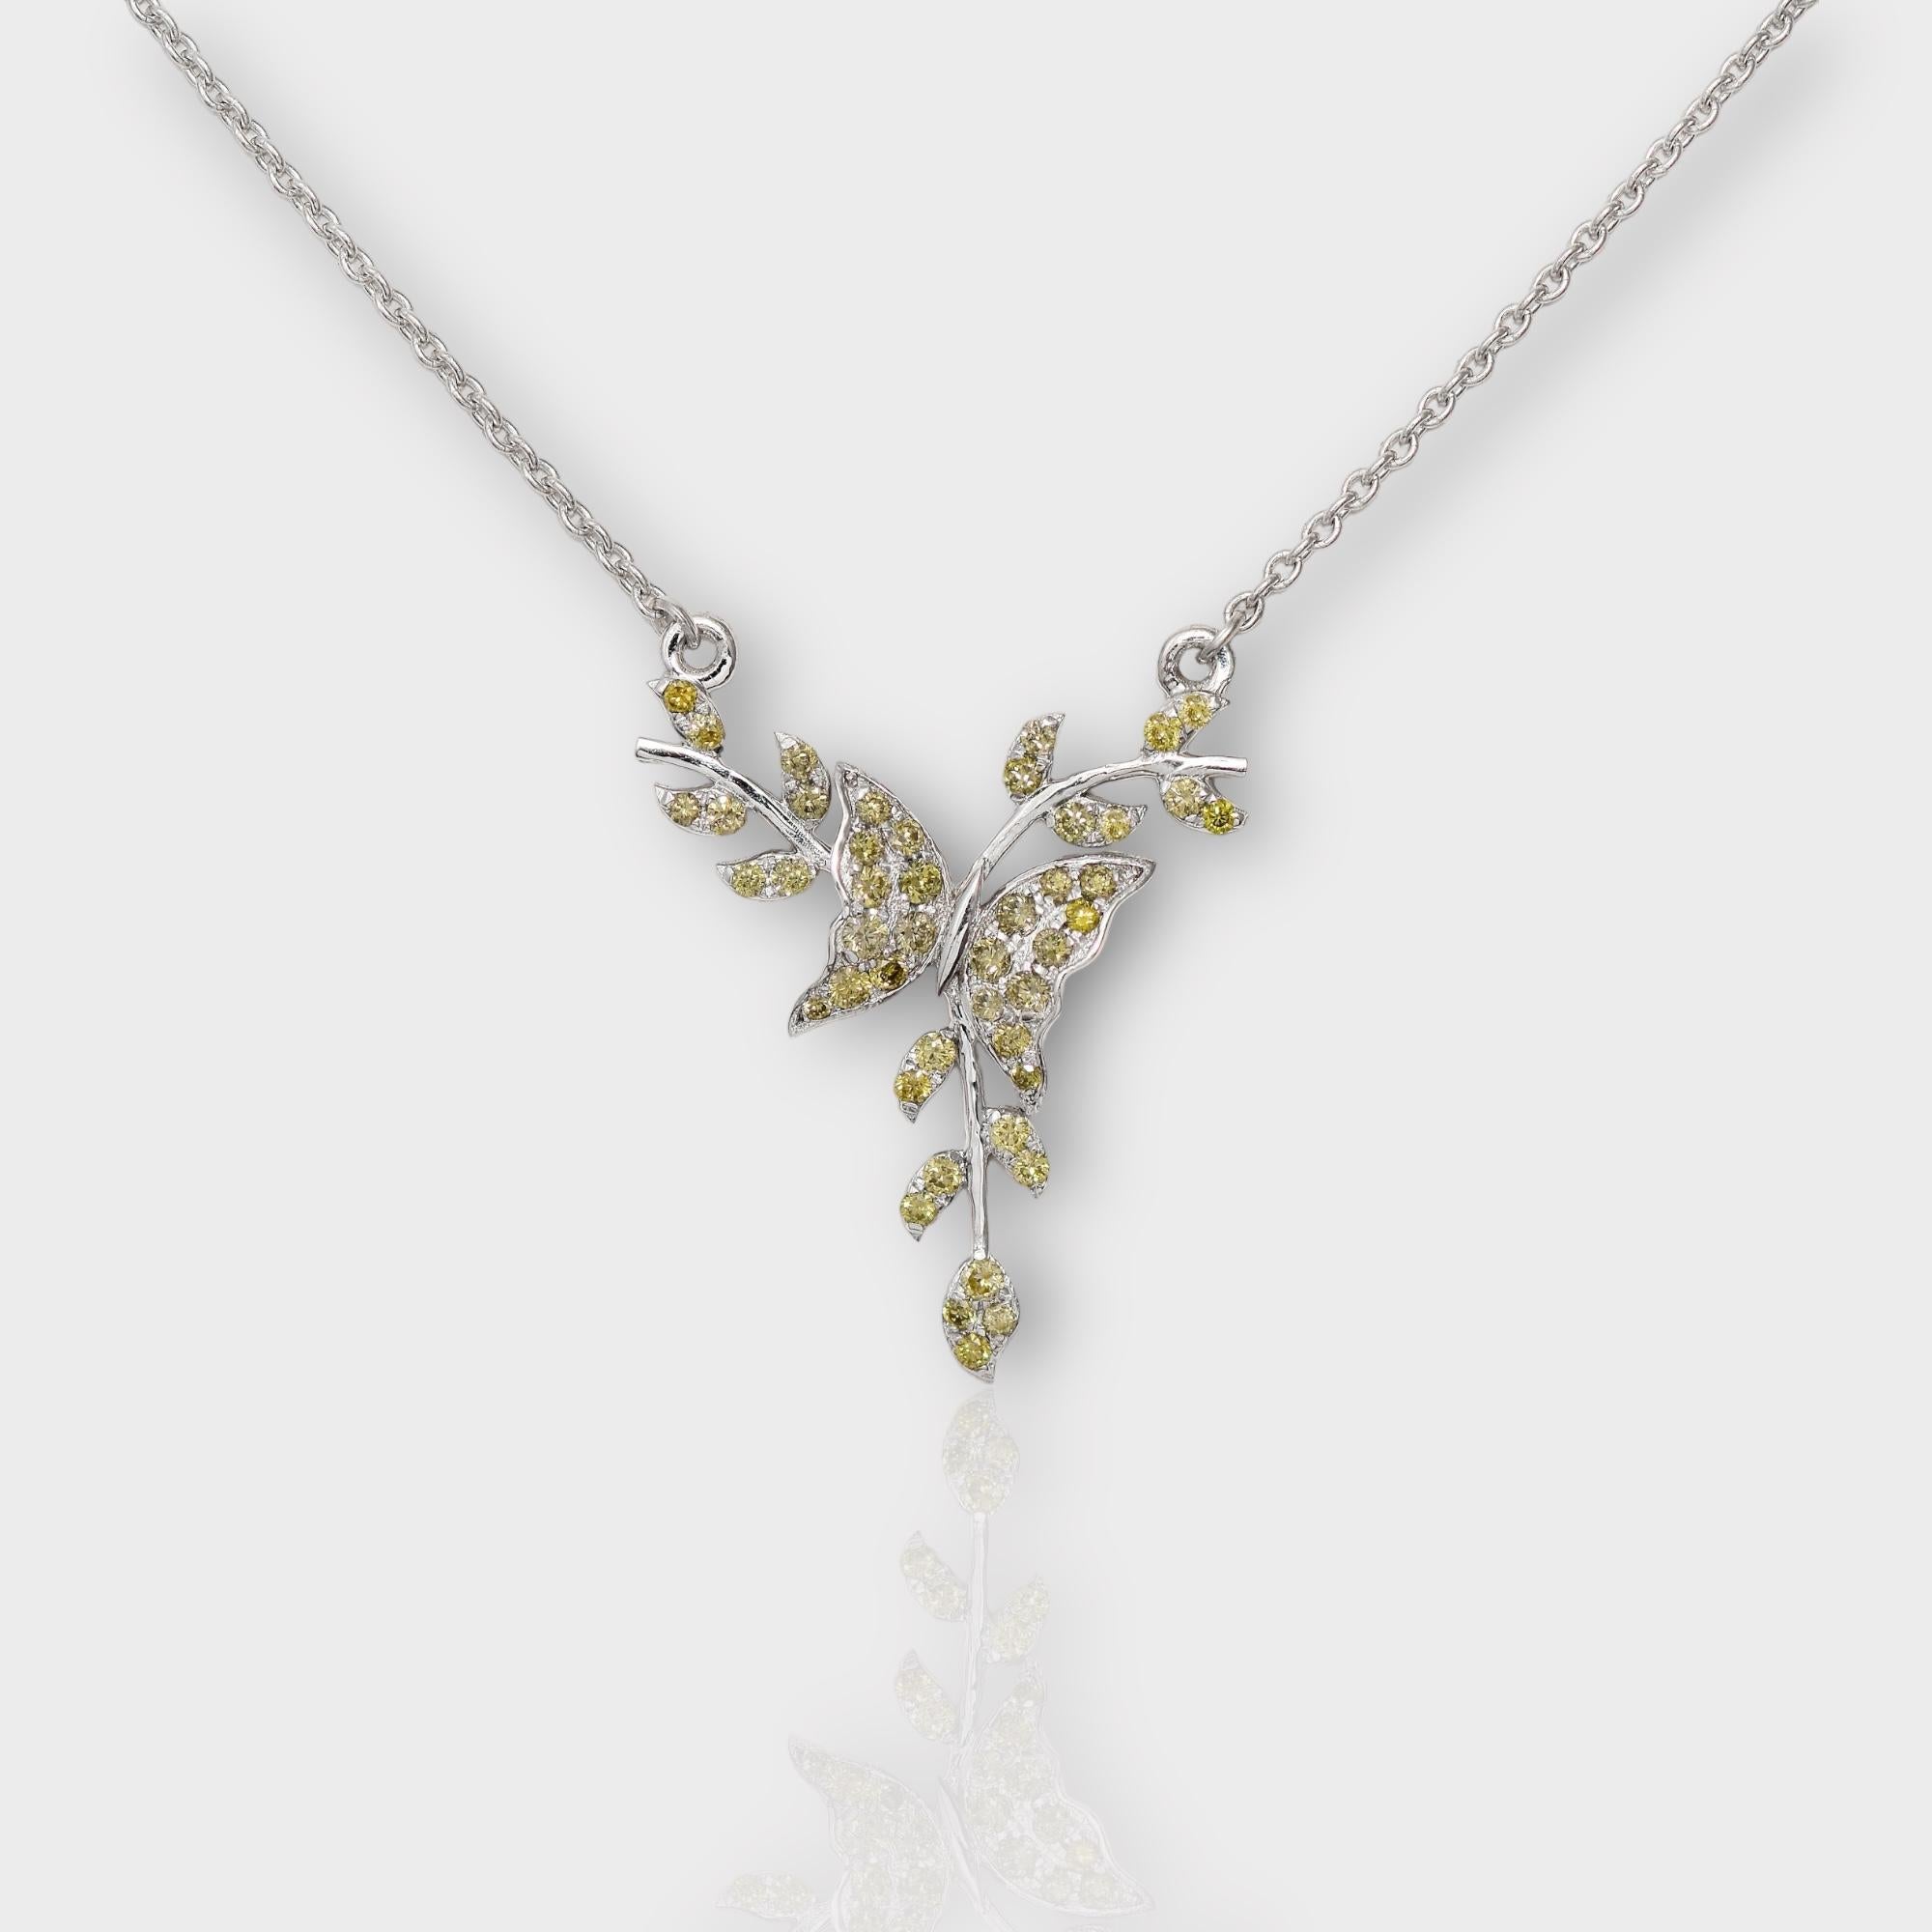 *IGI 14K 0.25 ct Natural Greenish Yellow Diamonds Branches Design Necklace*

This band features a stunning design with branches crafted from 14K white gold. It is set with natural, intense greenish-yellow diamonds weighing 0.25 carats.

This